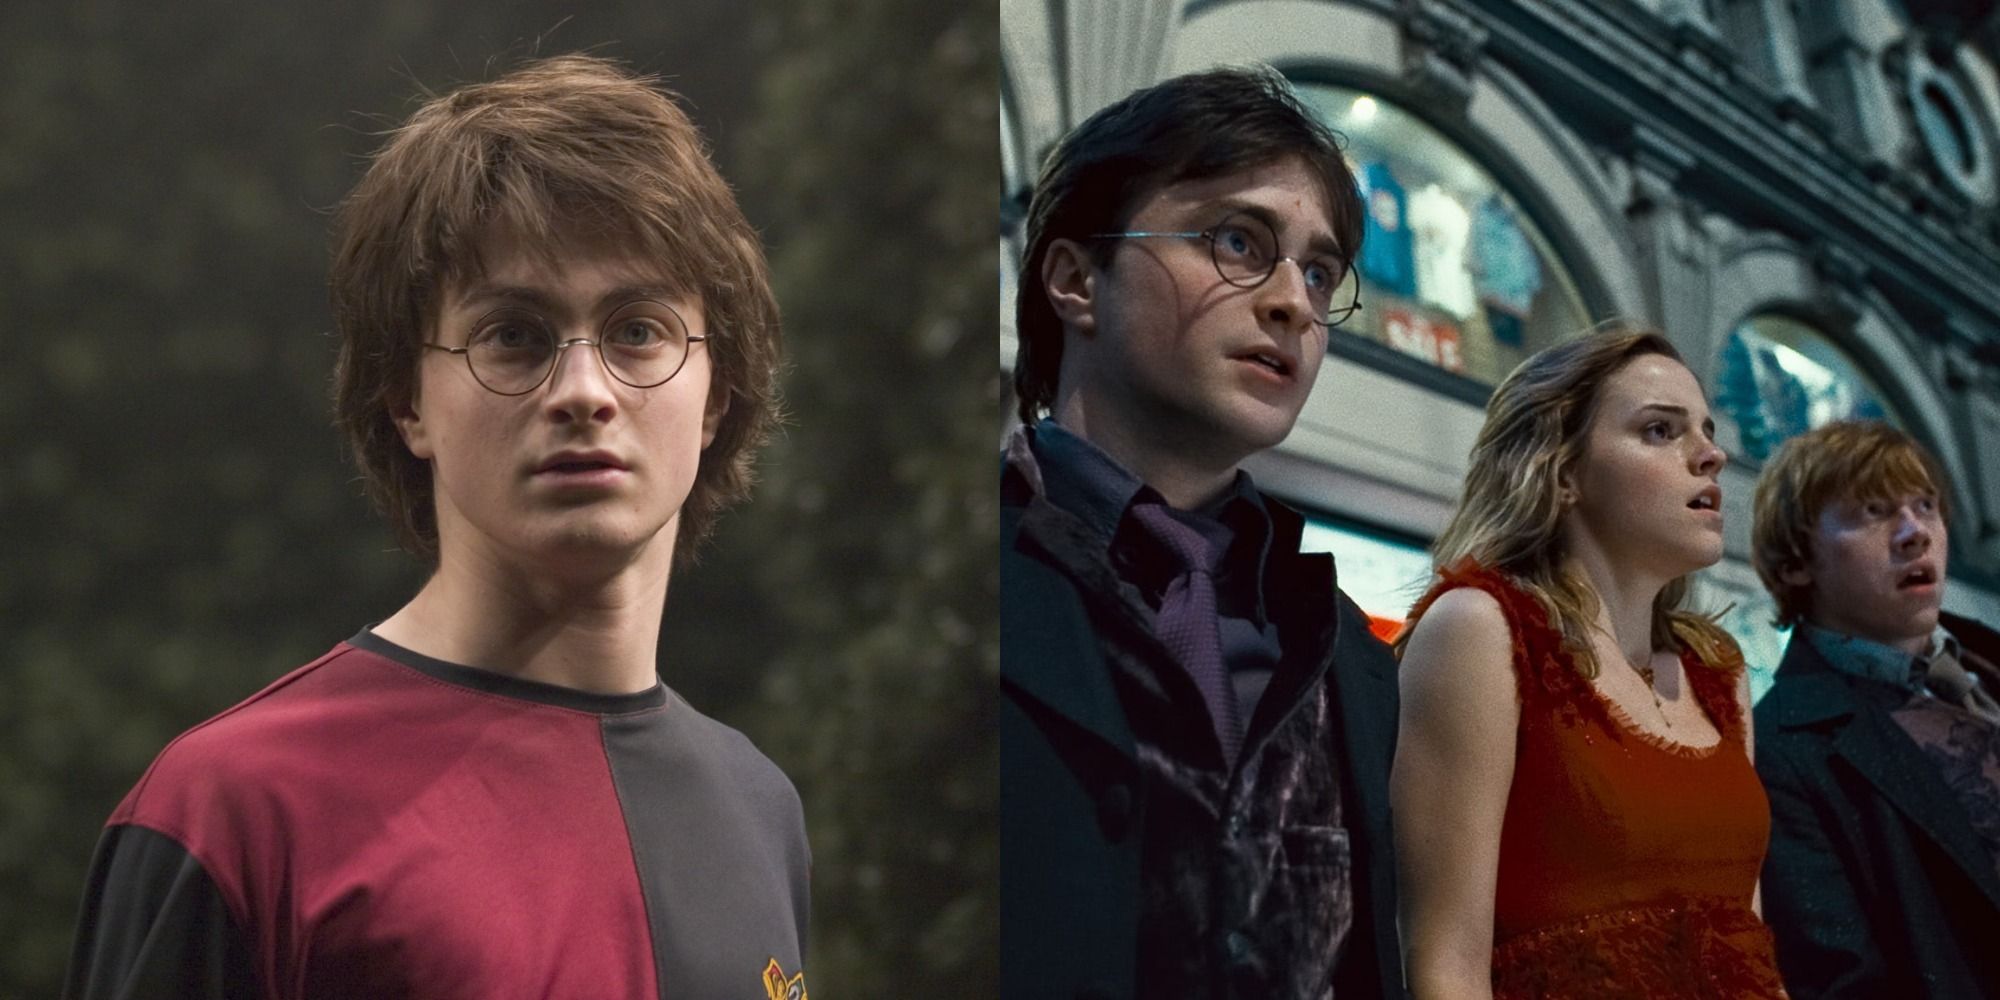 Split image showing Harry at the Triwizard Tournament, and Harry, Ron, and Hermione on the street